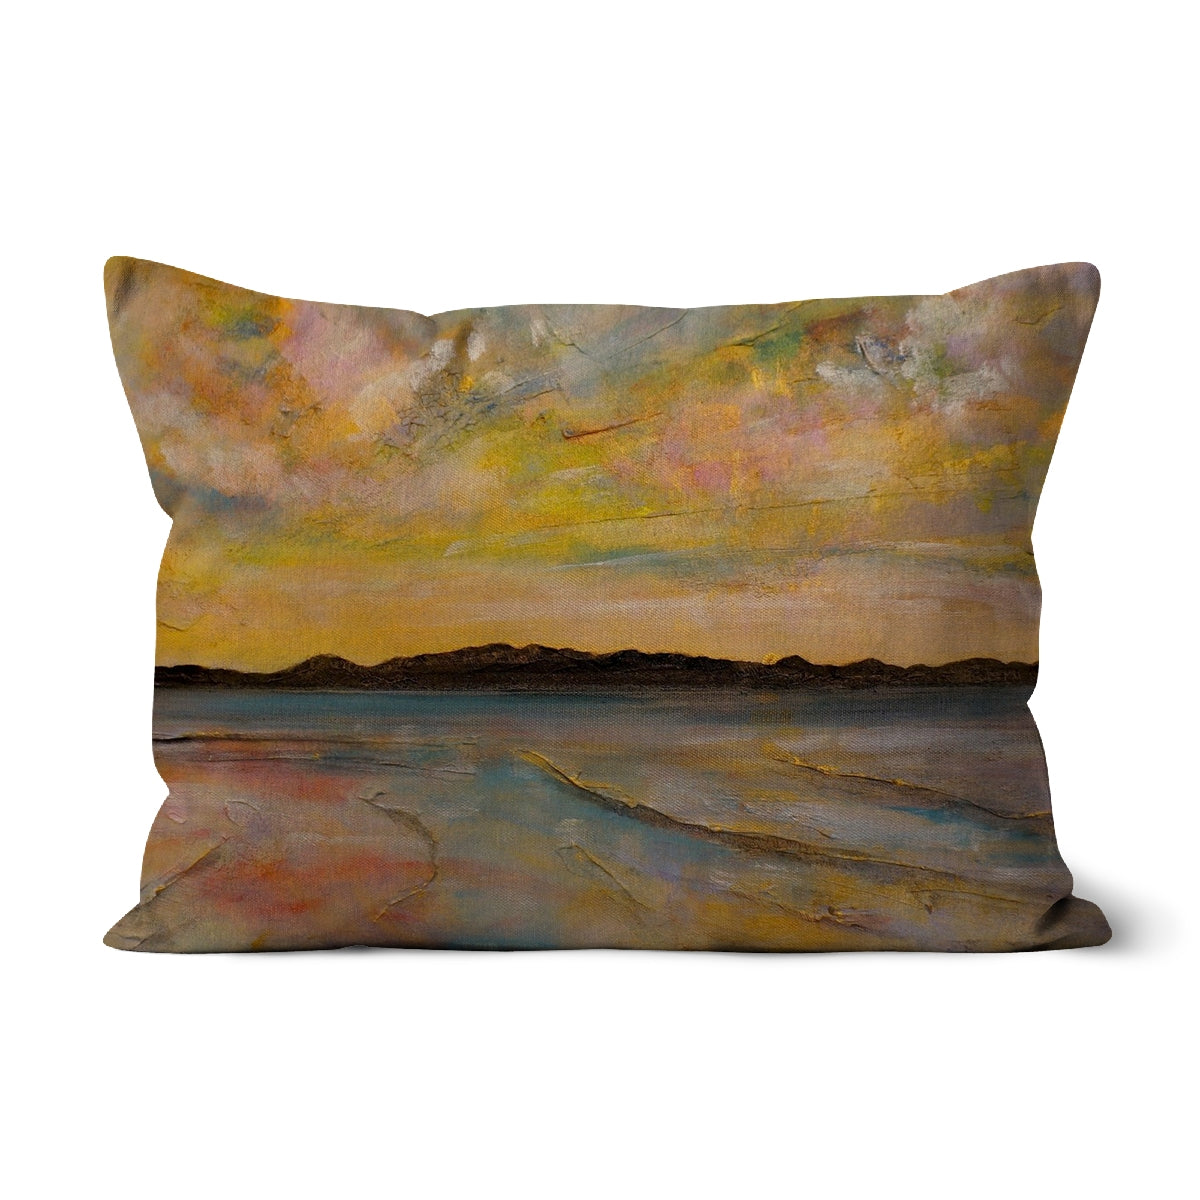 Vallay Island North Uist Art Gifts Cushion-Cushions-Hebridean Islands Art Gallery-Canvas-19"x13"-Paintings, Prints, Homeware, Art Gifts From Scotland By Scottish Artist Kevin Hunter